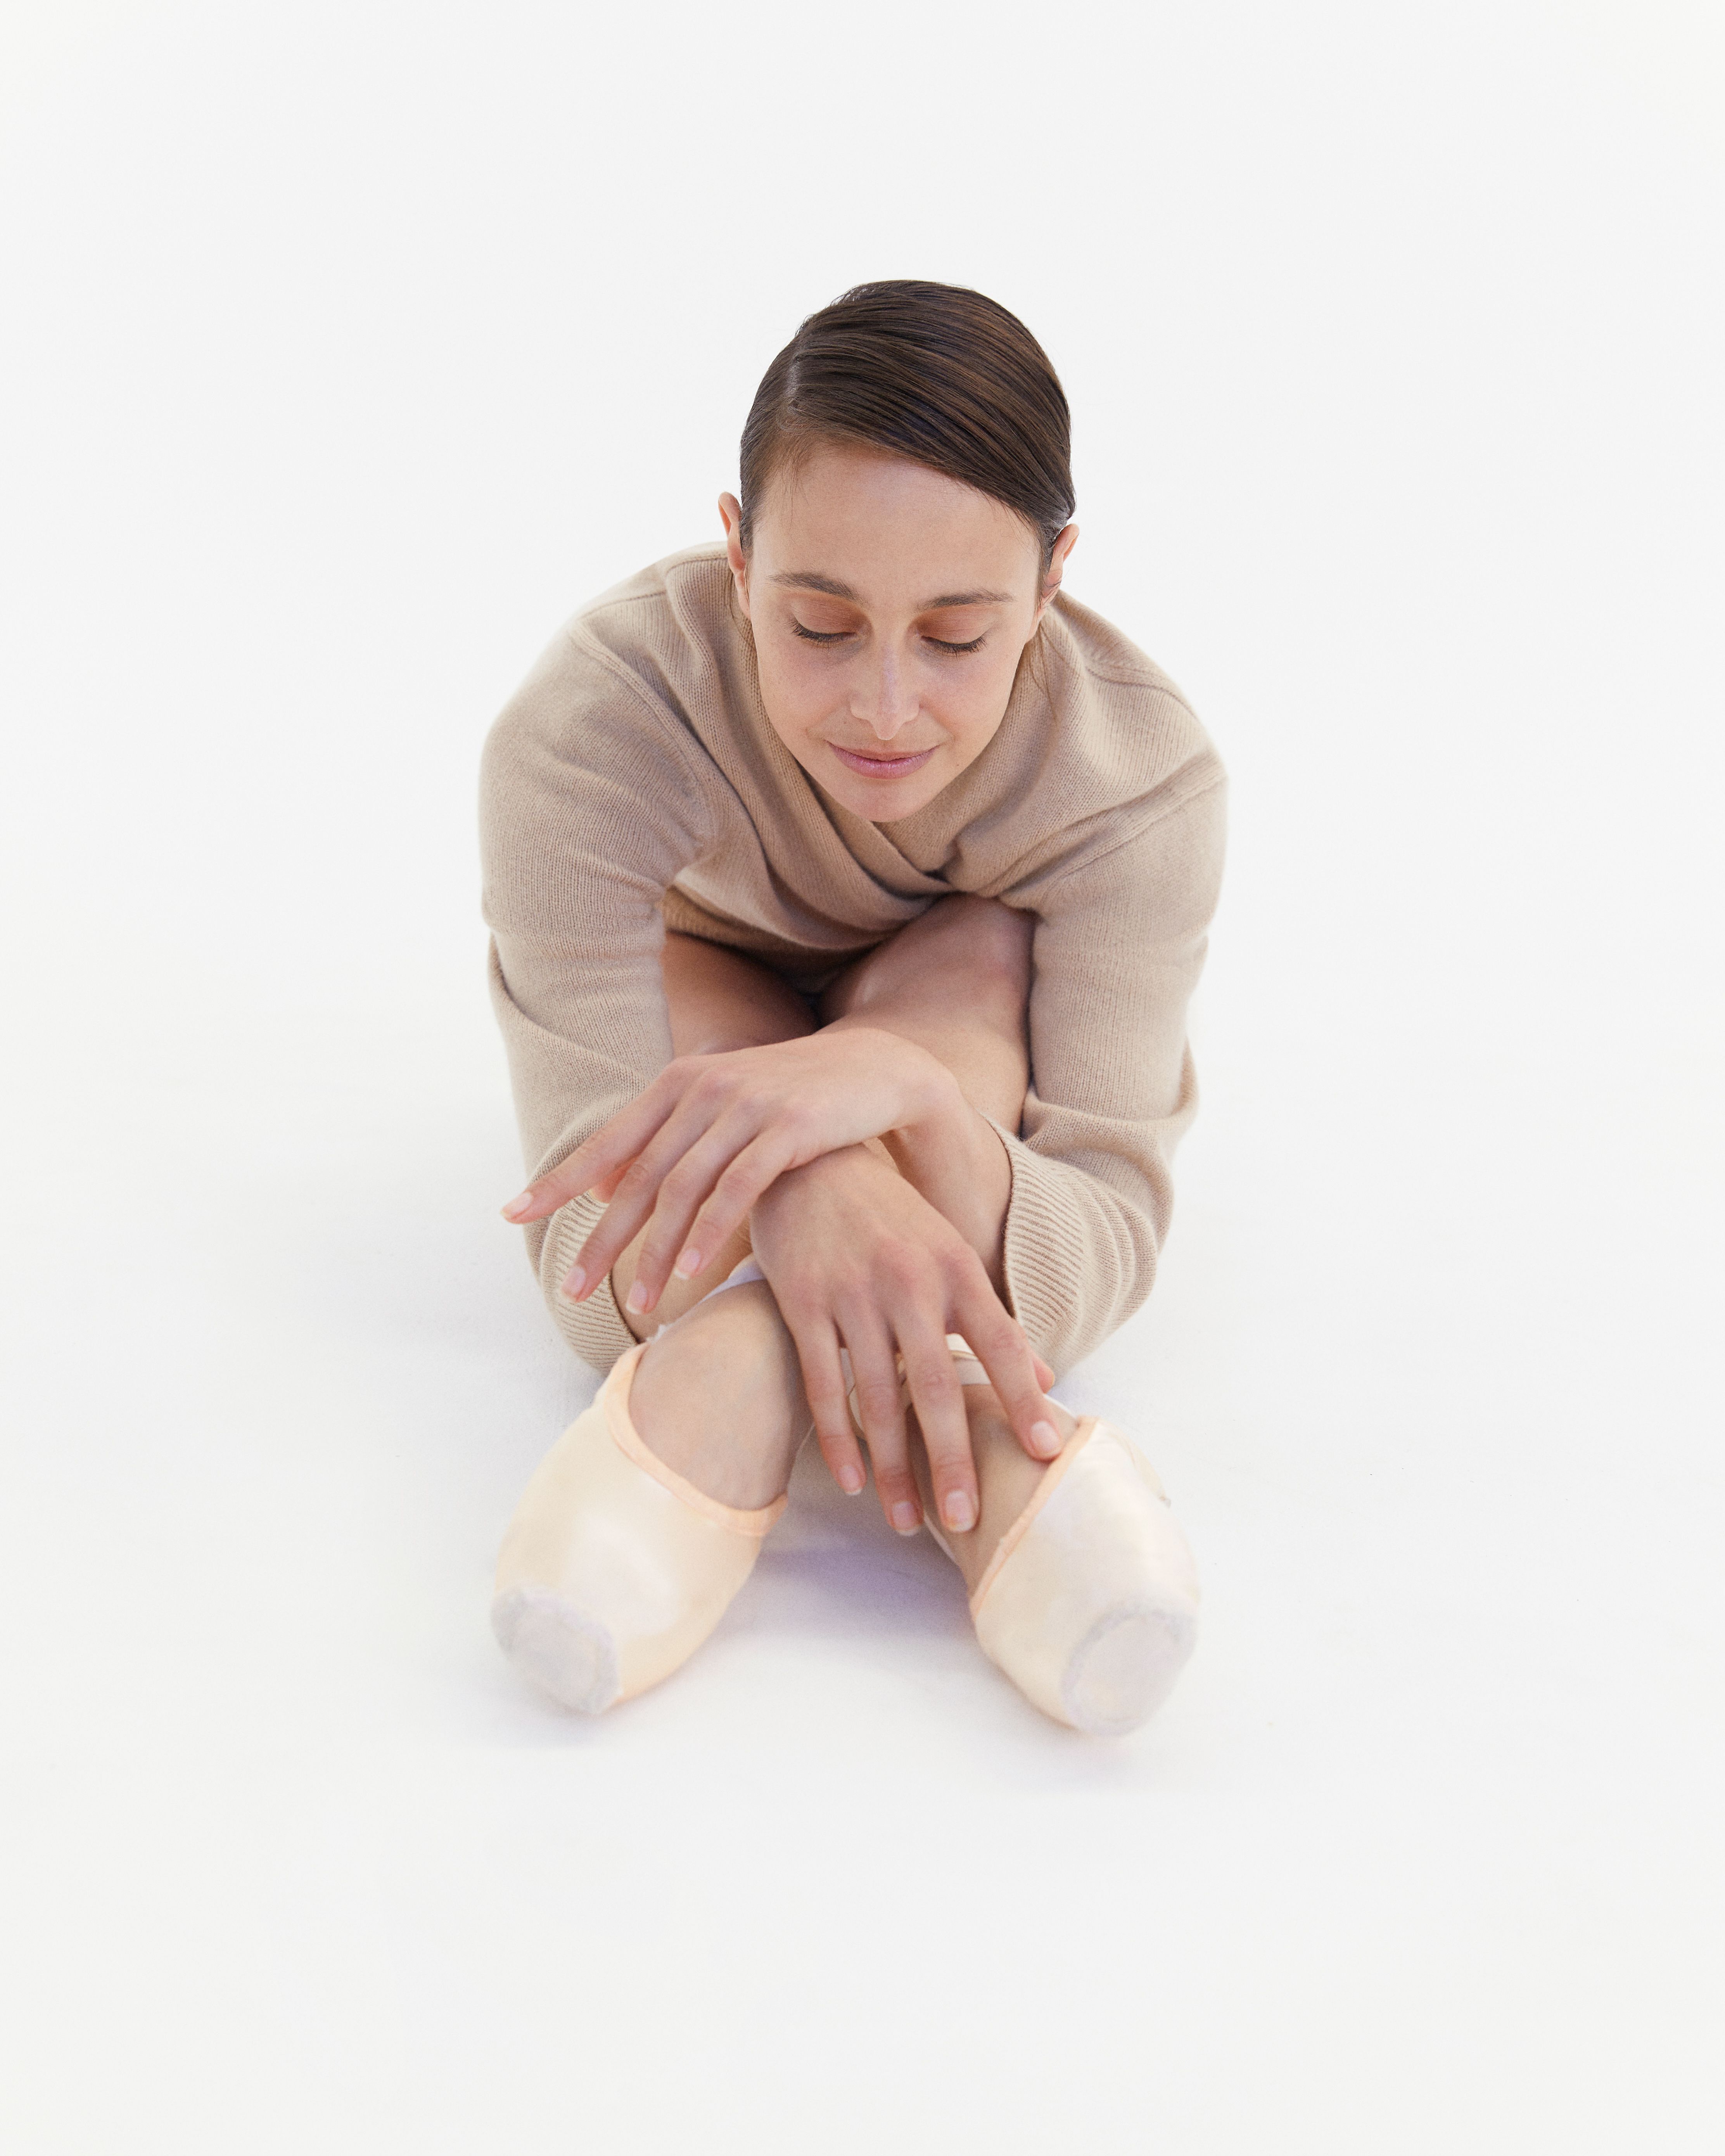 Dimity Azoury sitting down leaning over her feet wearing a beige knit and pointe shoes